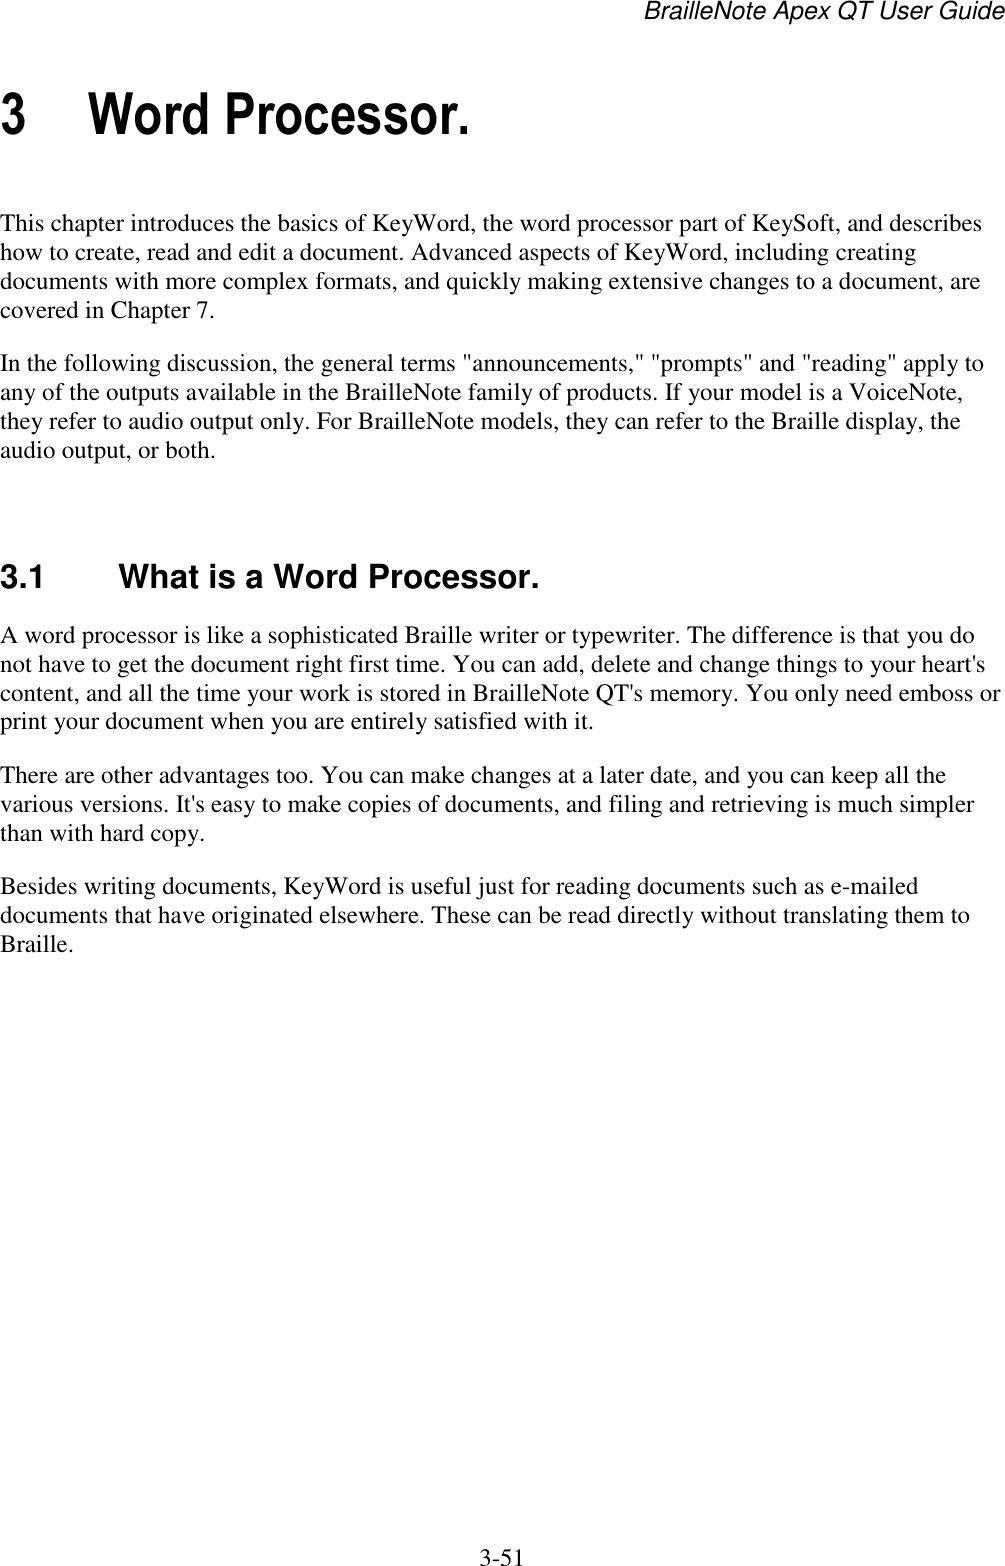 BrailleNote Apex QT User Guide  3-51   3 Word Processor. This chapter introduces the basics of KeyWord, the word processor part of KeySoft, and describes how to create, read and edit a document. Advanced aspects of KeyWord, including creating documents with more complex formats, and quickly making extensive changes to a document, are covered in Chapter 7. In the following discussion, the general terms &quot;announcements,&quot; &quot;prompts&quot; and &quot;reading&quot; apply to any of the outputs available in the BrailleNote family of products. If your model is a VoiceNote, they refer to audio output only. For BrailleNote models, they can refer to the Braille display, the audio output, or both.   3.1  What is a Word Processor. A word processor is like a sophisticated Braille writer or typewriter. The difference is that you do not have to get the document right first time. You can add, delete and change things to your heart&apos;s content, and all the time your work is stored in BrailleNote QT&apos;s memory. You only need emboss or print your document when you are entirely satisfied with it. There are other advantages too. You can make changes at a later date, and you can keep all the various versions. It&apos;s easy to make copies of documents, and filing and retrieving is much simpler than with hard copy. Besides writing documents, KeyWord is useful just for reading documents such as e-mailed documents that have originated elsewhere. These can be read directly without translating them to Braille.   